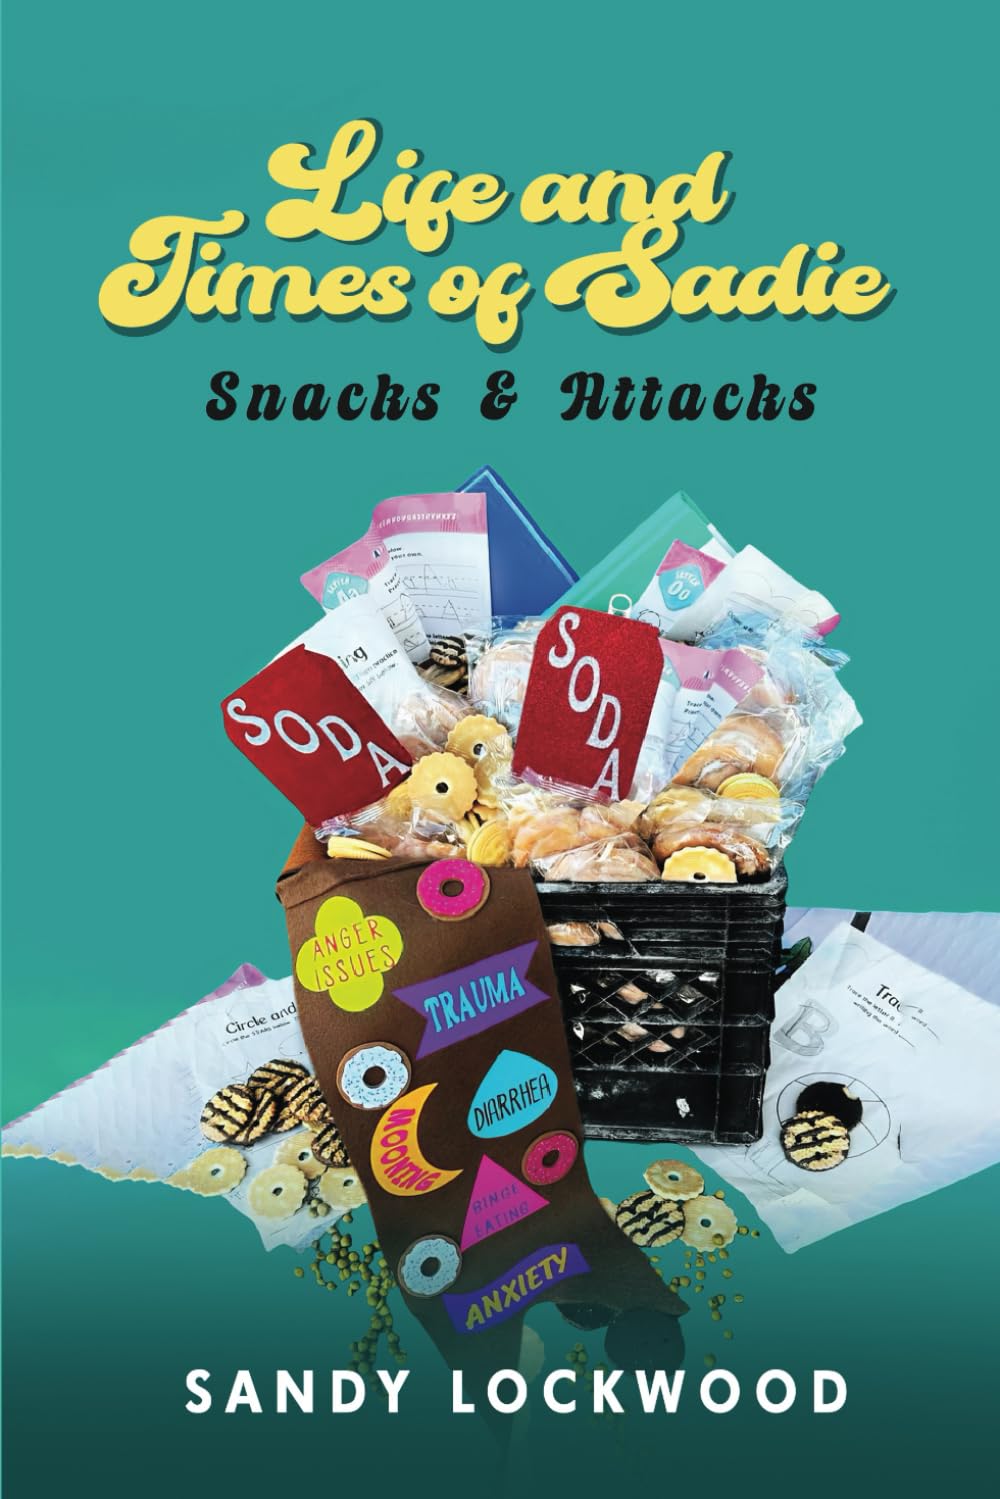 Sandy Lockwood’s Debut Book "Life and Times of Sadie: Snacks & Attacks" Explores Growing up in 1970s West Texas With Humor and Heart 